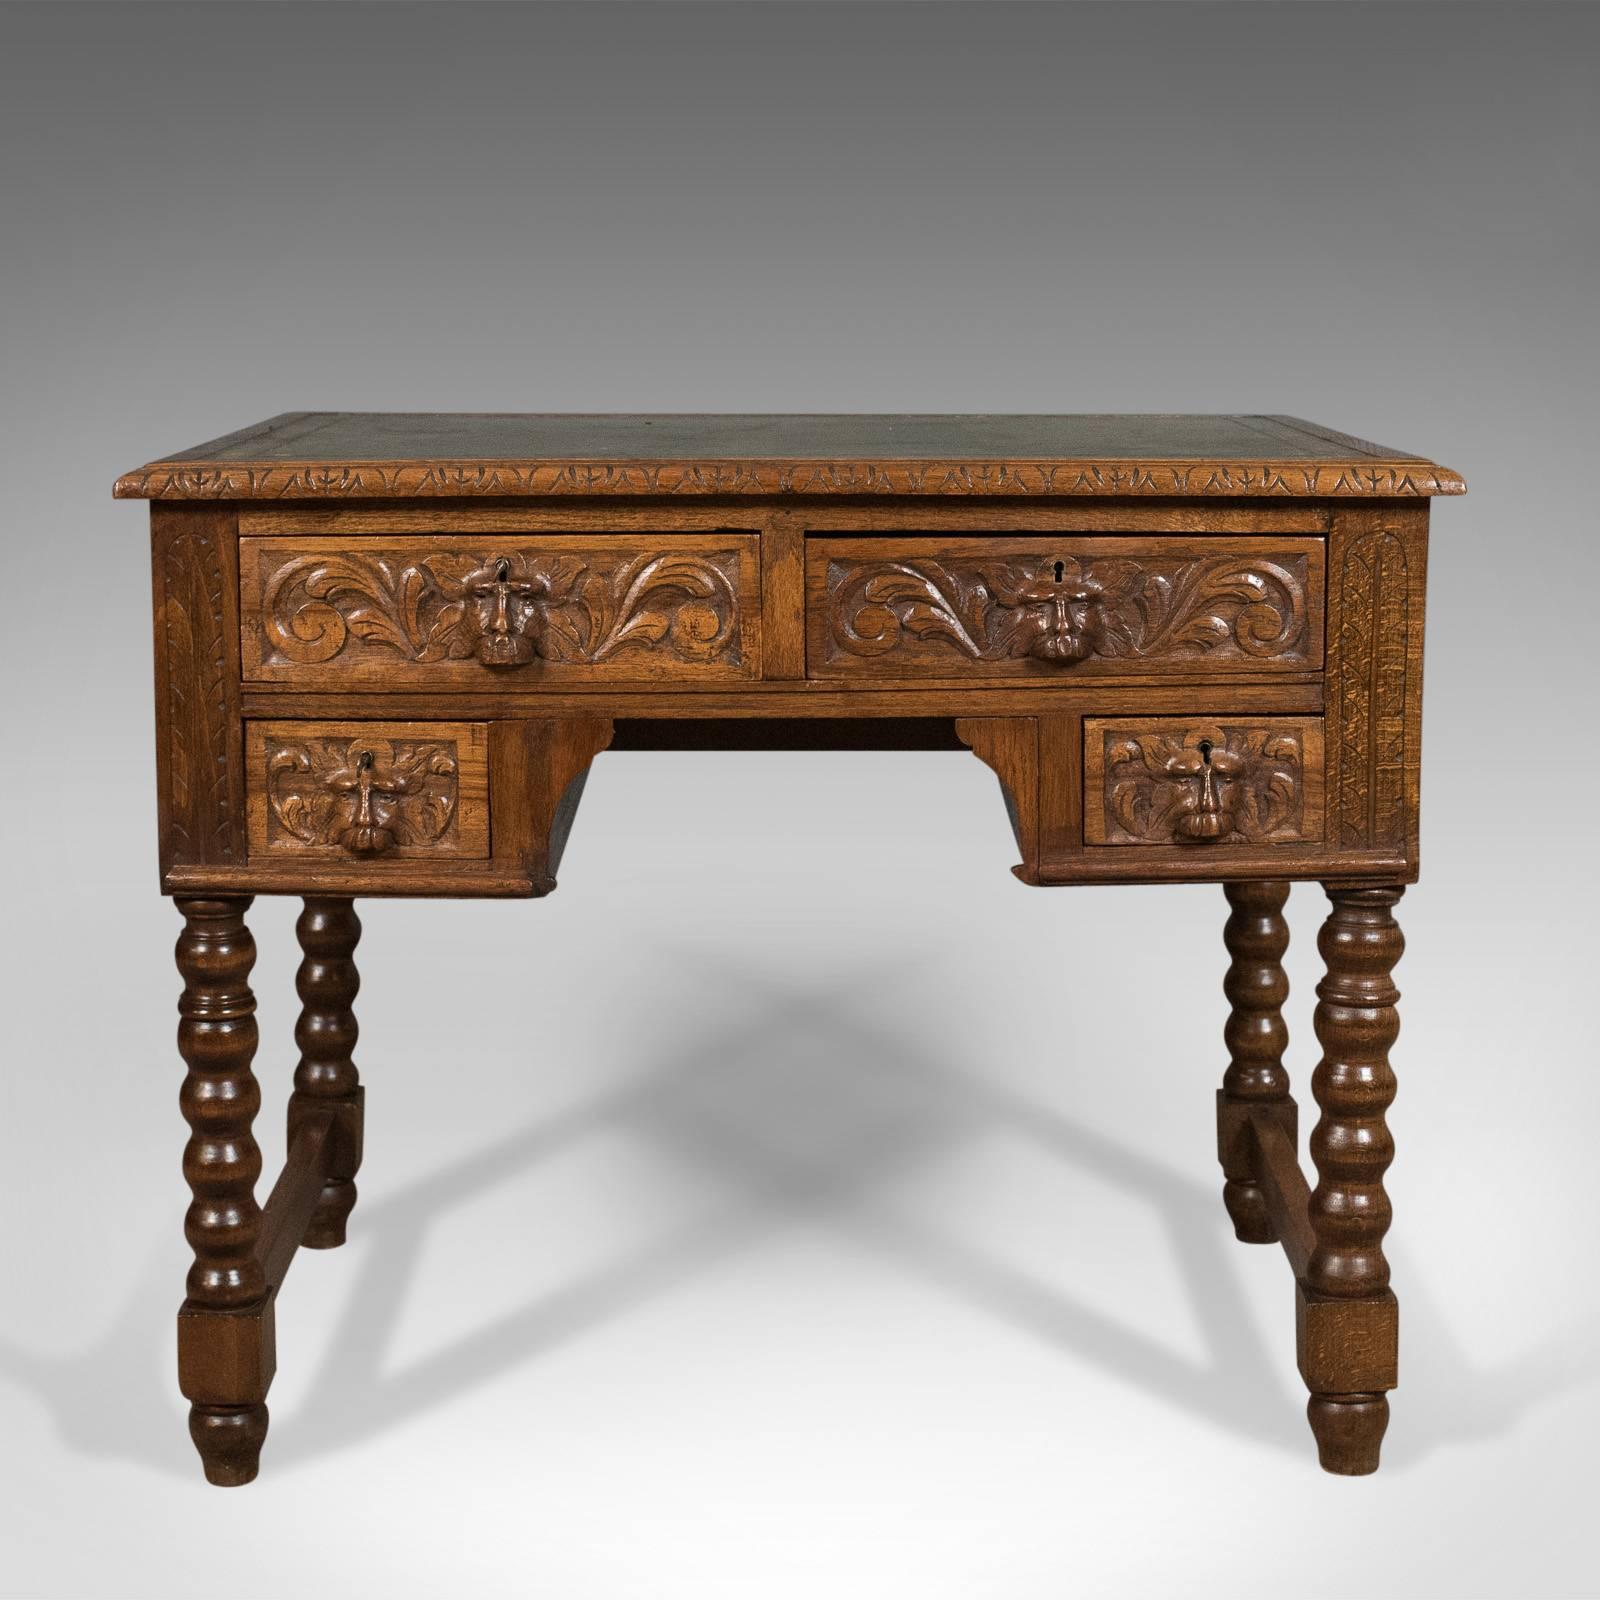 This is an antique, green man lowboy, an English oak, Victorian desk or writing table dating to, circa 1900.

Good color and patina to the English oak
Raised on bobbin turned legs with end stretchers

Well executed carving to the green man